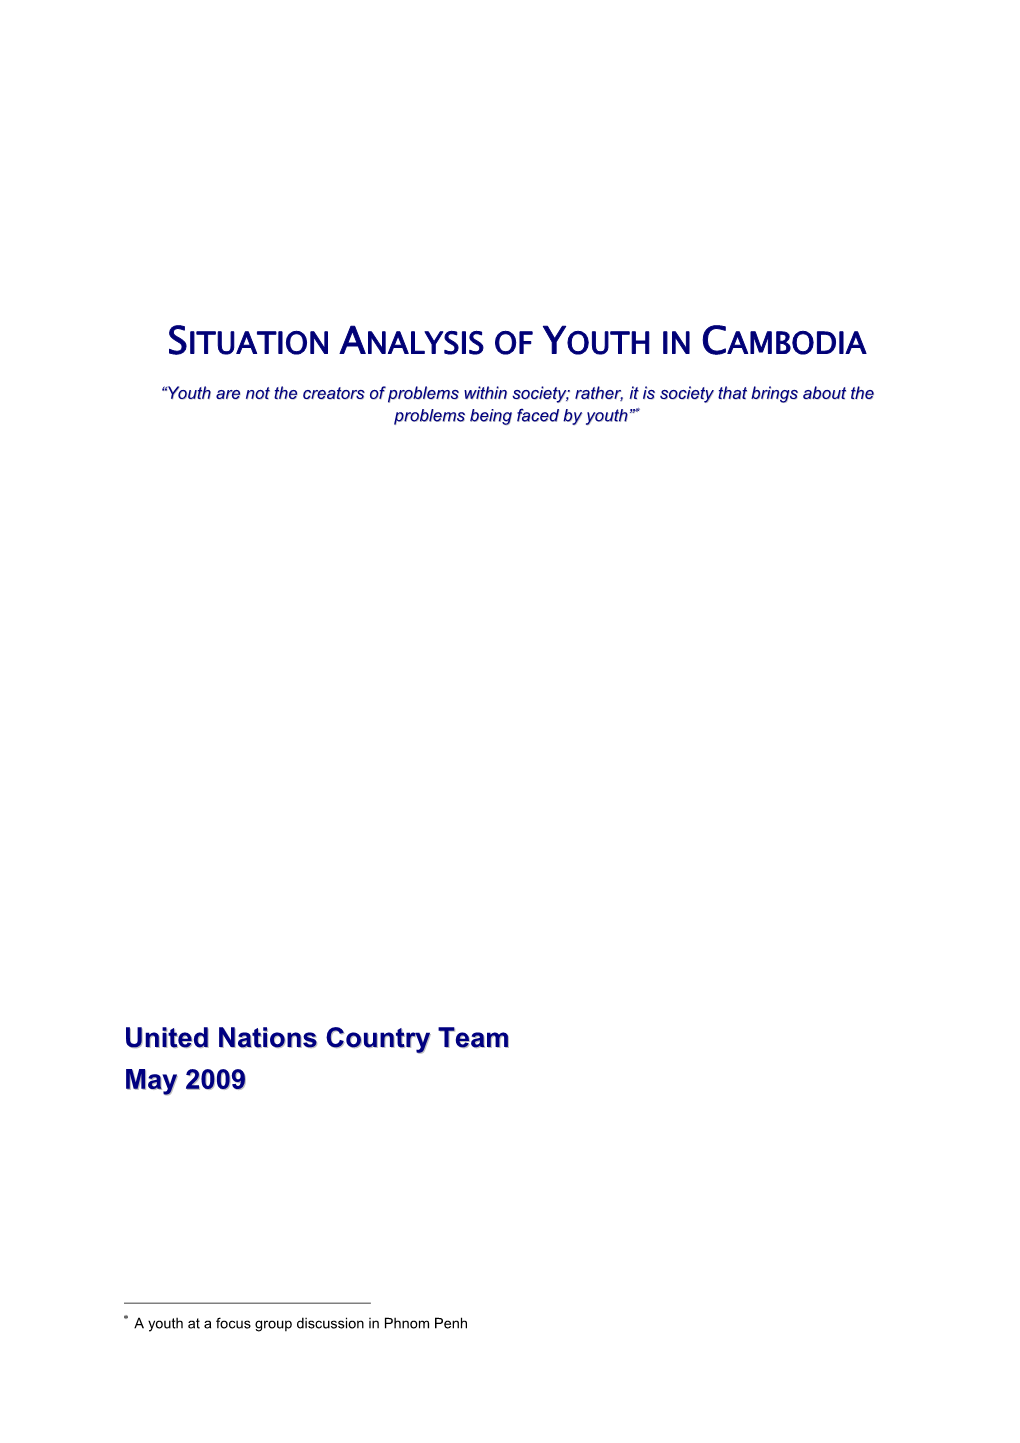 Situation Analysis of Youth in Cambodia